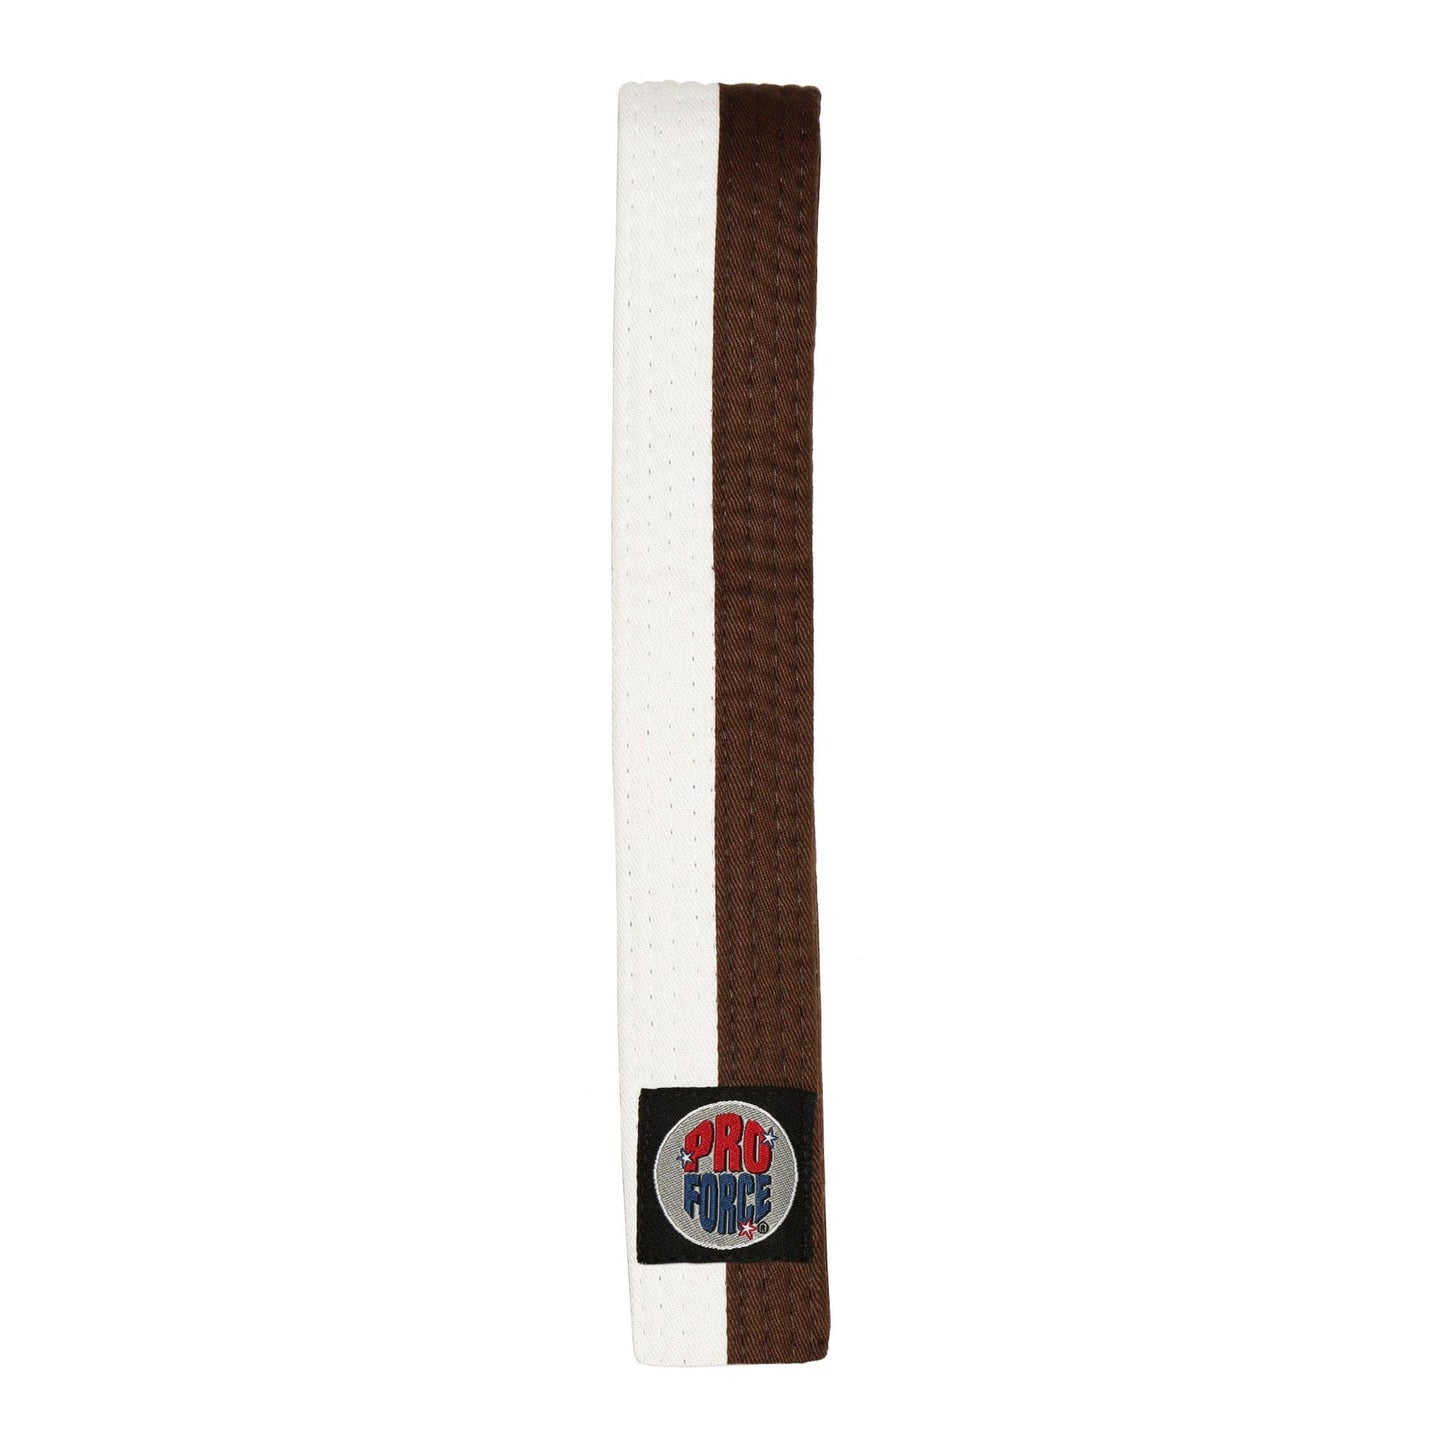 ProForce karate belt Brown / 0 child Small ProForce 1.5 inch wide Double Wrap Two-Tone Karate Belt